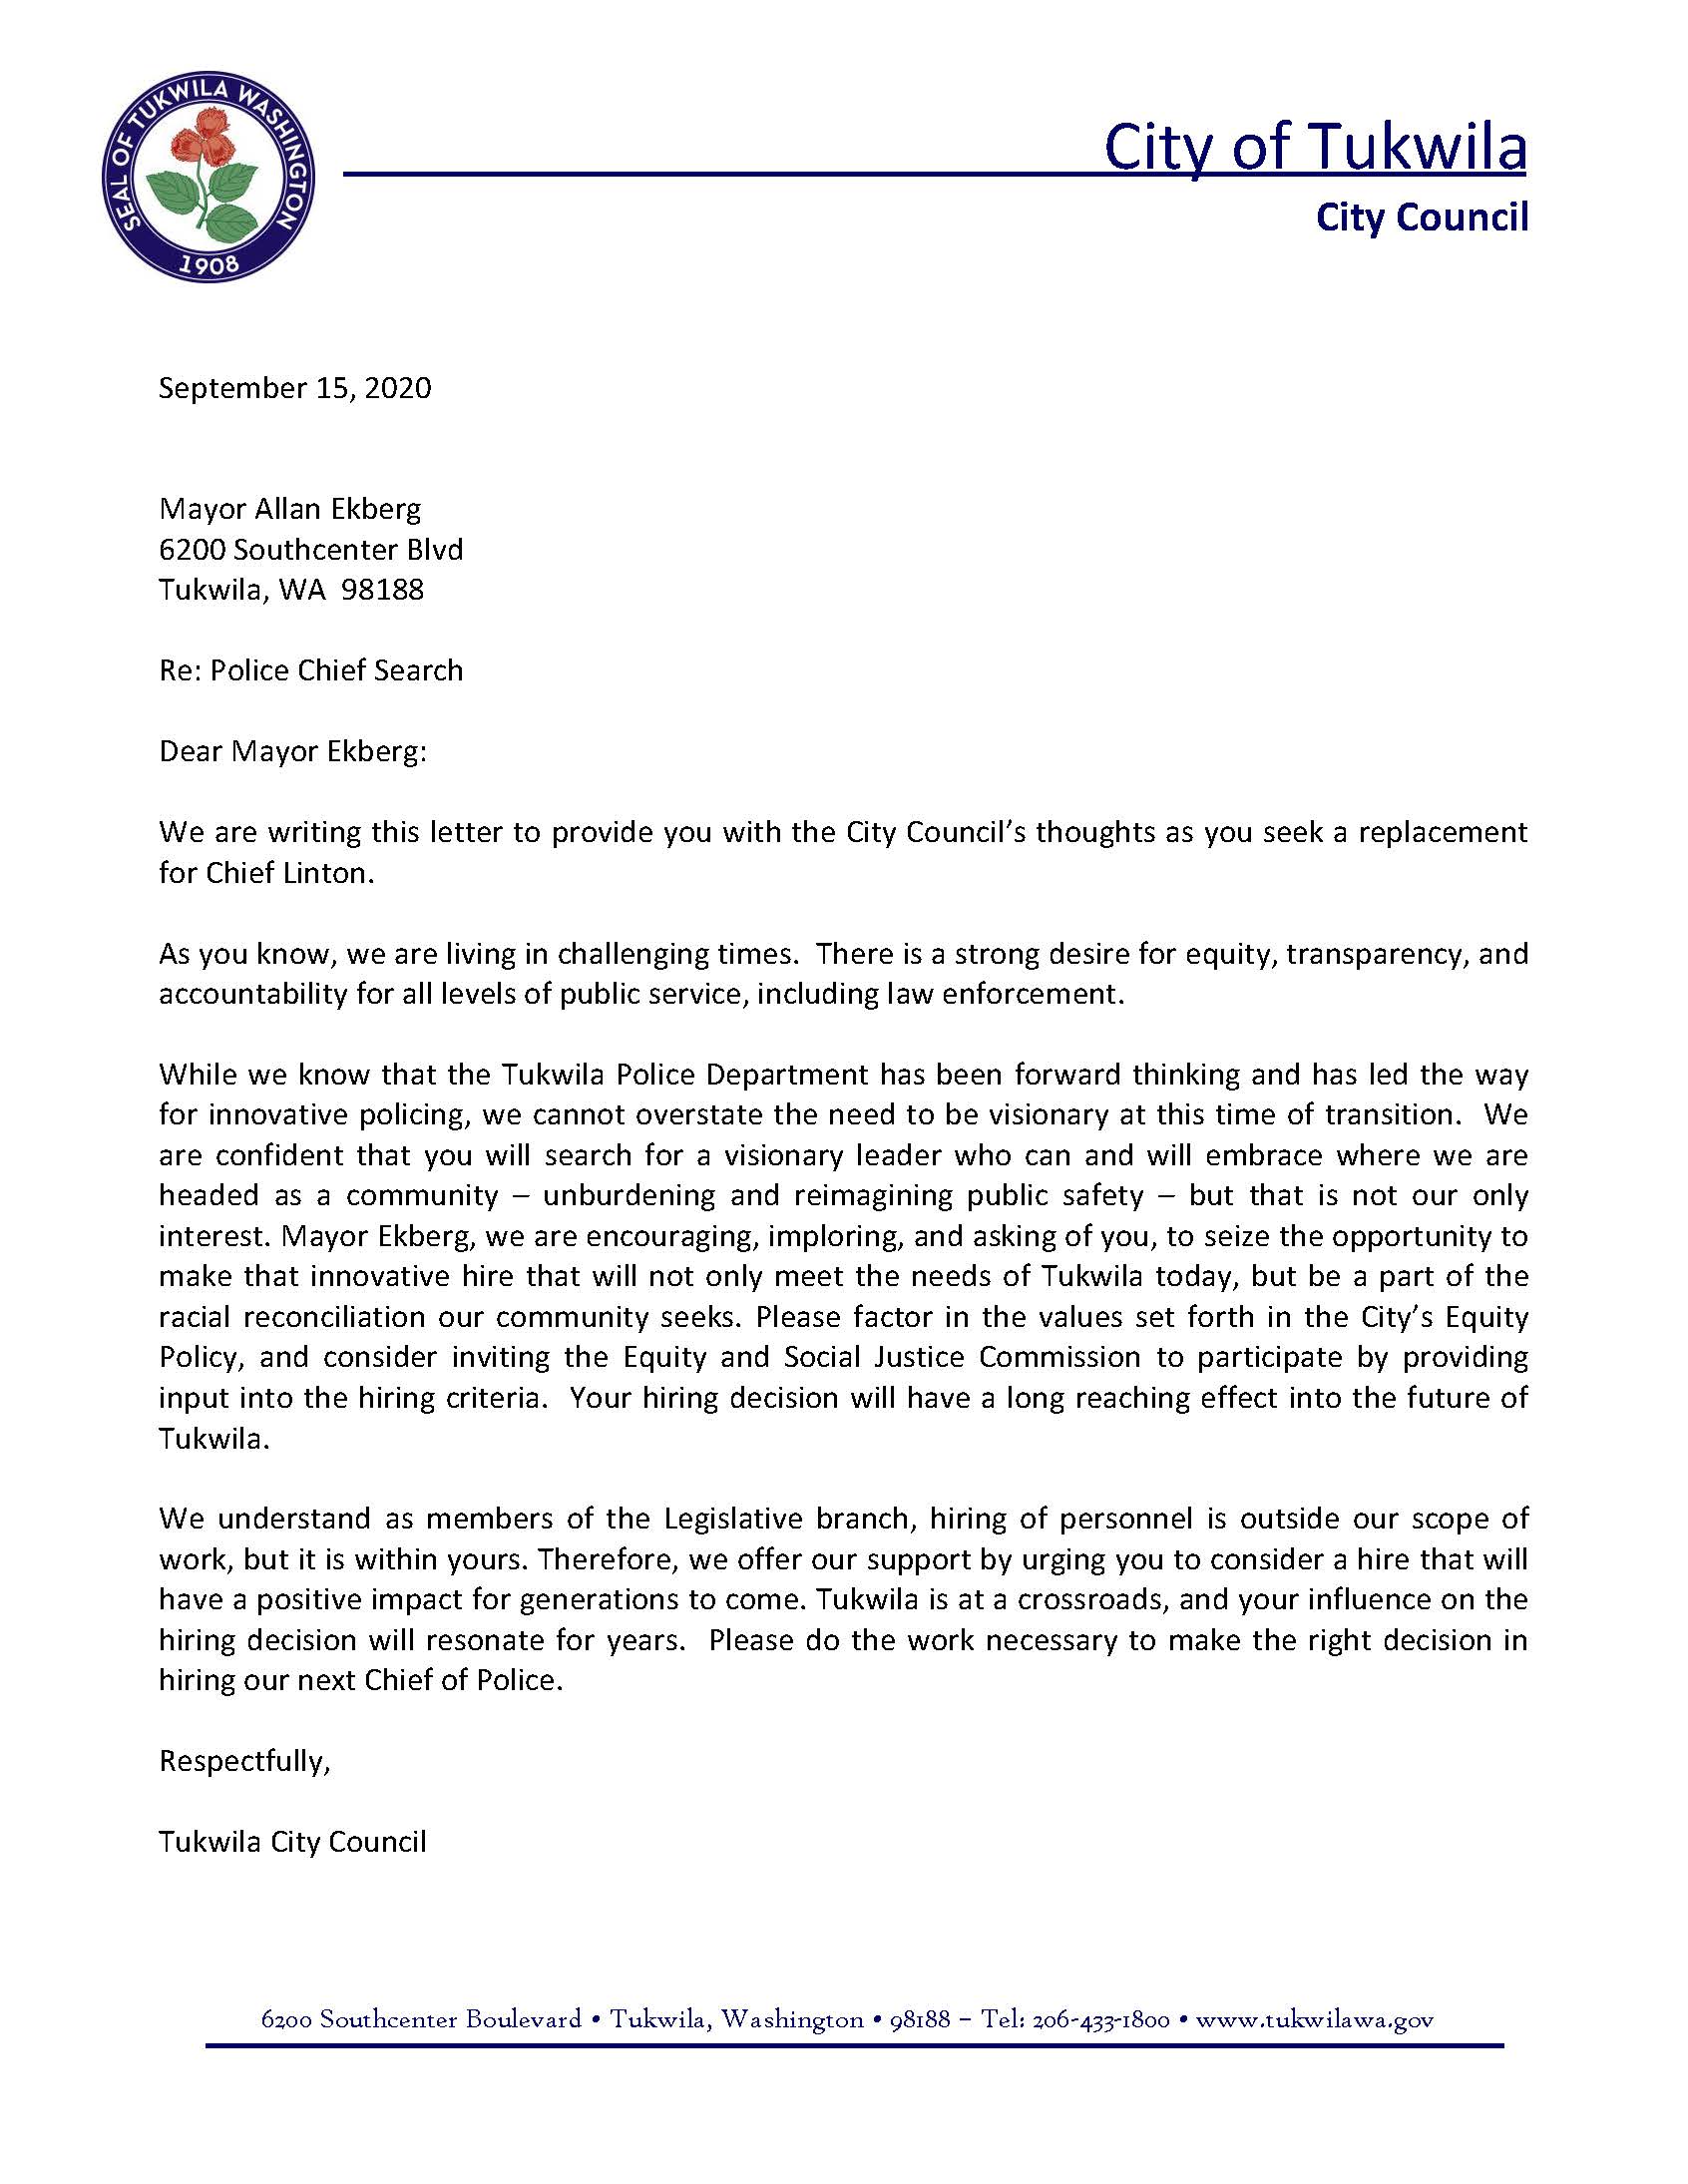 city-council-letter-to-mayor-9-15-20-city-of-tukwila